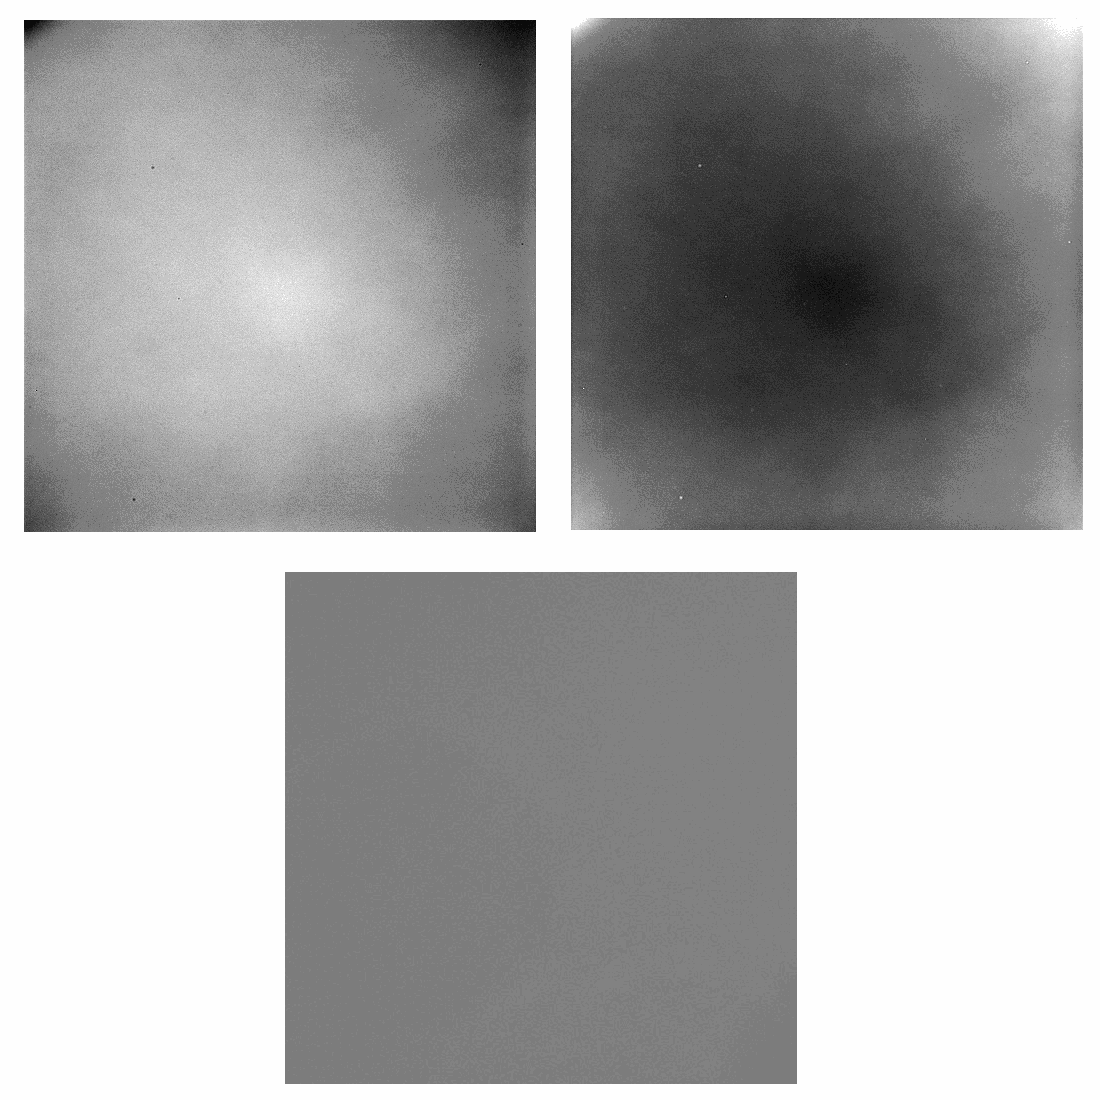 Figure 1: The image on the top left  depicts the uneven illumination typically seen in a flat-field image.  Calibration of this image with the calibration matrix, i.e., the image  on the top right, results in the image at the bottom, which is evenly illuminated.